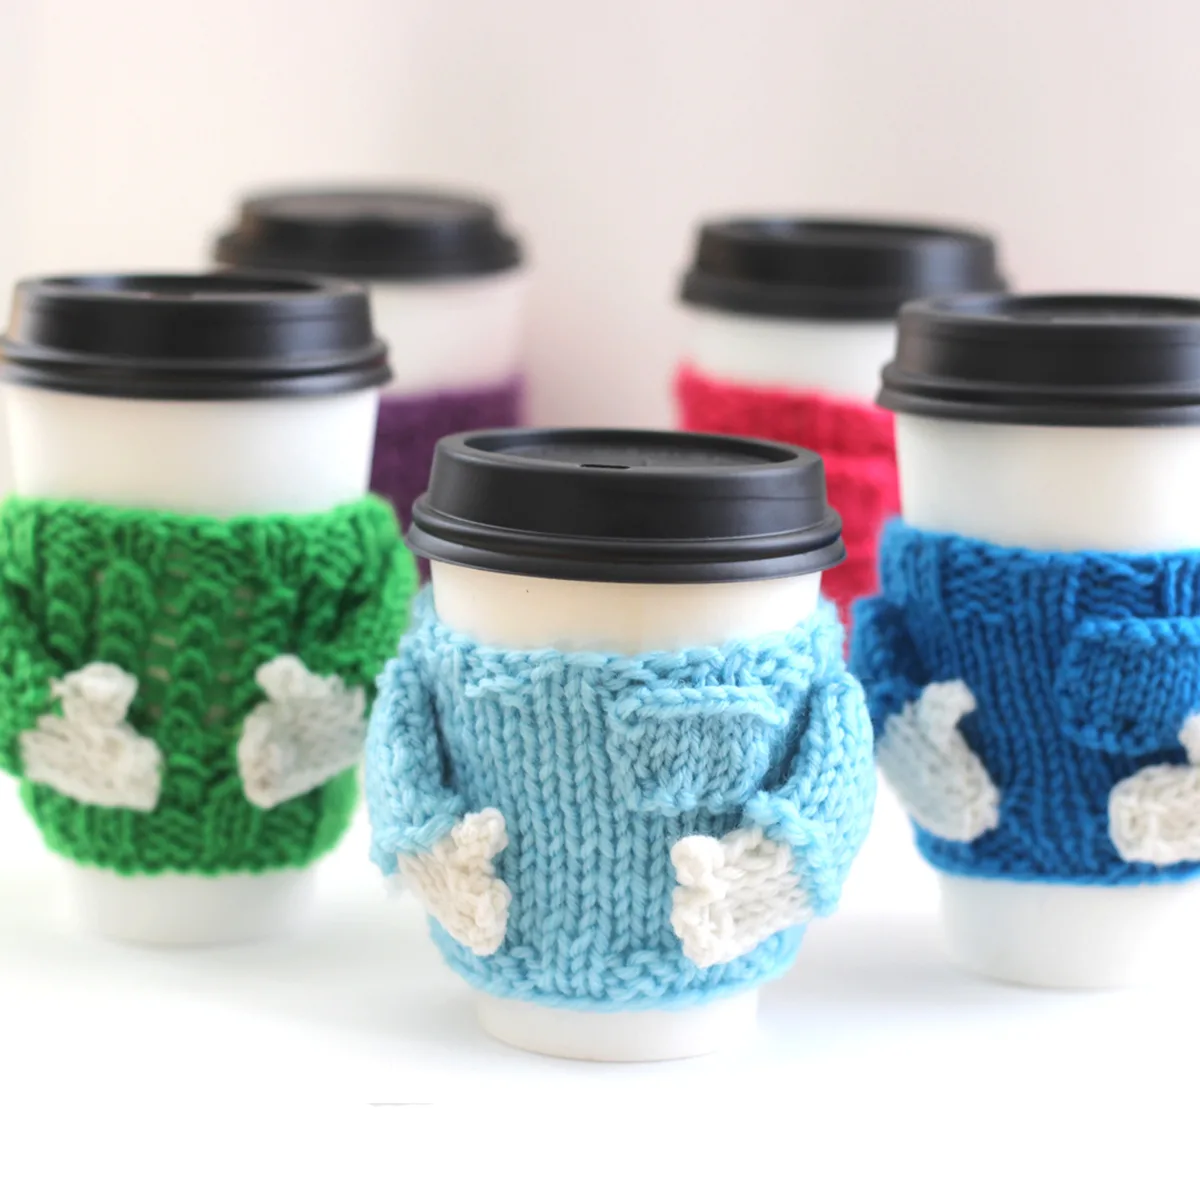 Take Out Coffee Cups with knitted sweater designed mug cozies in various colors.